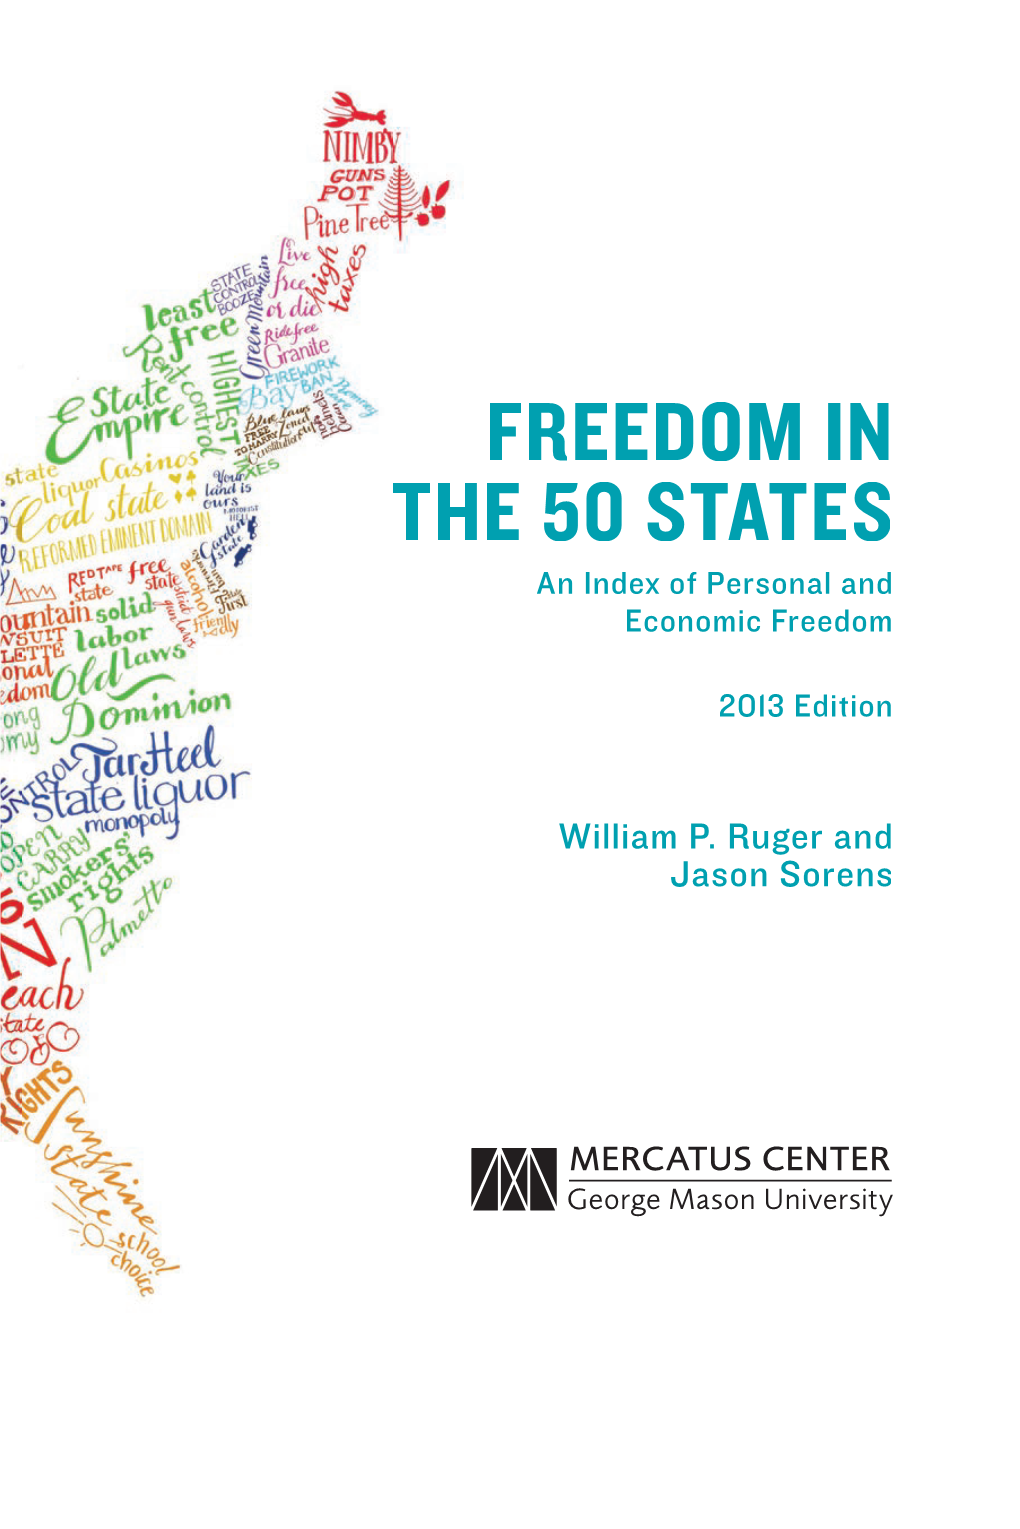 FREEDOM in the 50 STATES an Index of Personal and Economic Freedom